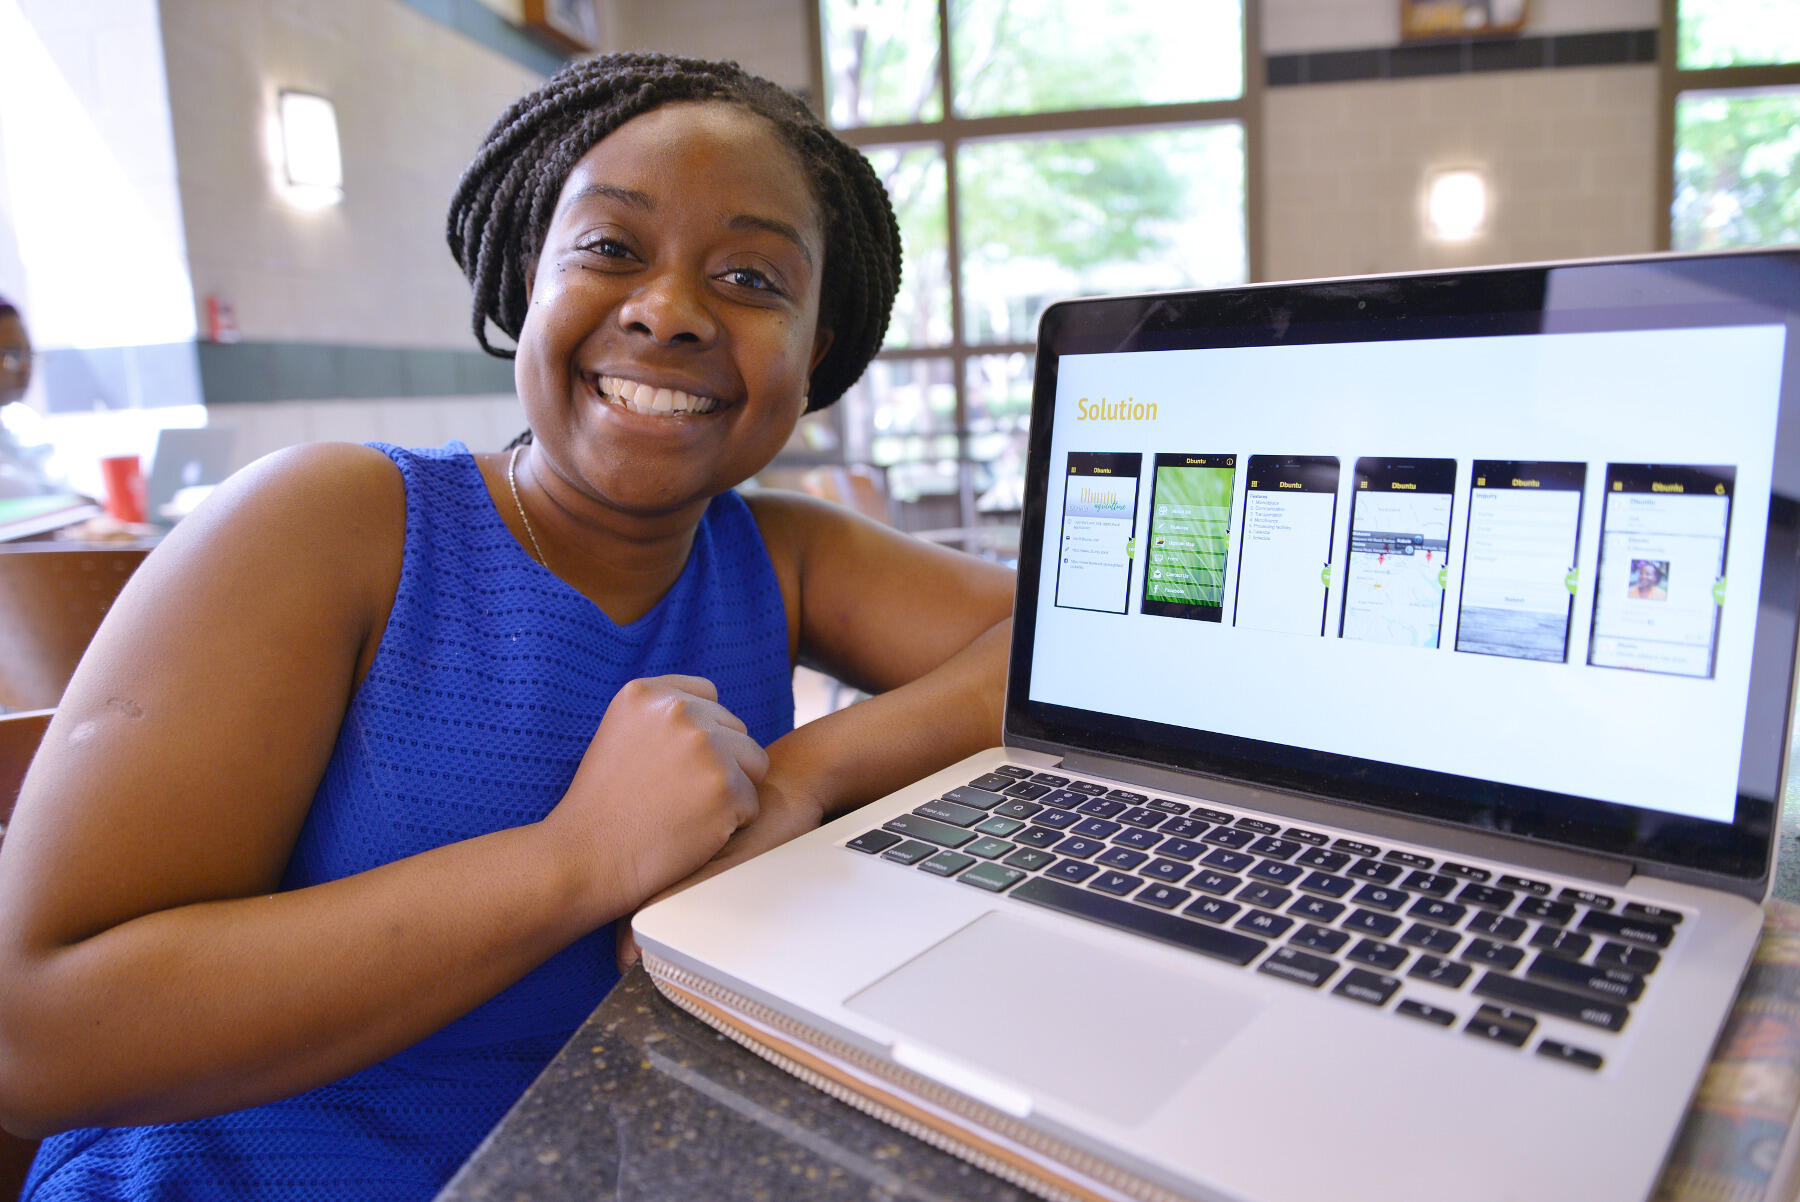 Tatenda Ndambakuwa, a senior in the Department of Mathematics and Applied Mathematics, is developing an app that will allow African farmers to upload data about their farm’s livestock and crop management, seed and feed access, milk production analysis, cattle pricing and other data points, thereby allowing real time agriculture mapping and planning for all individual farms. 